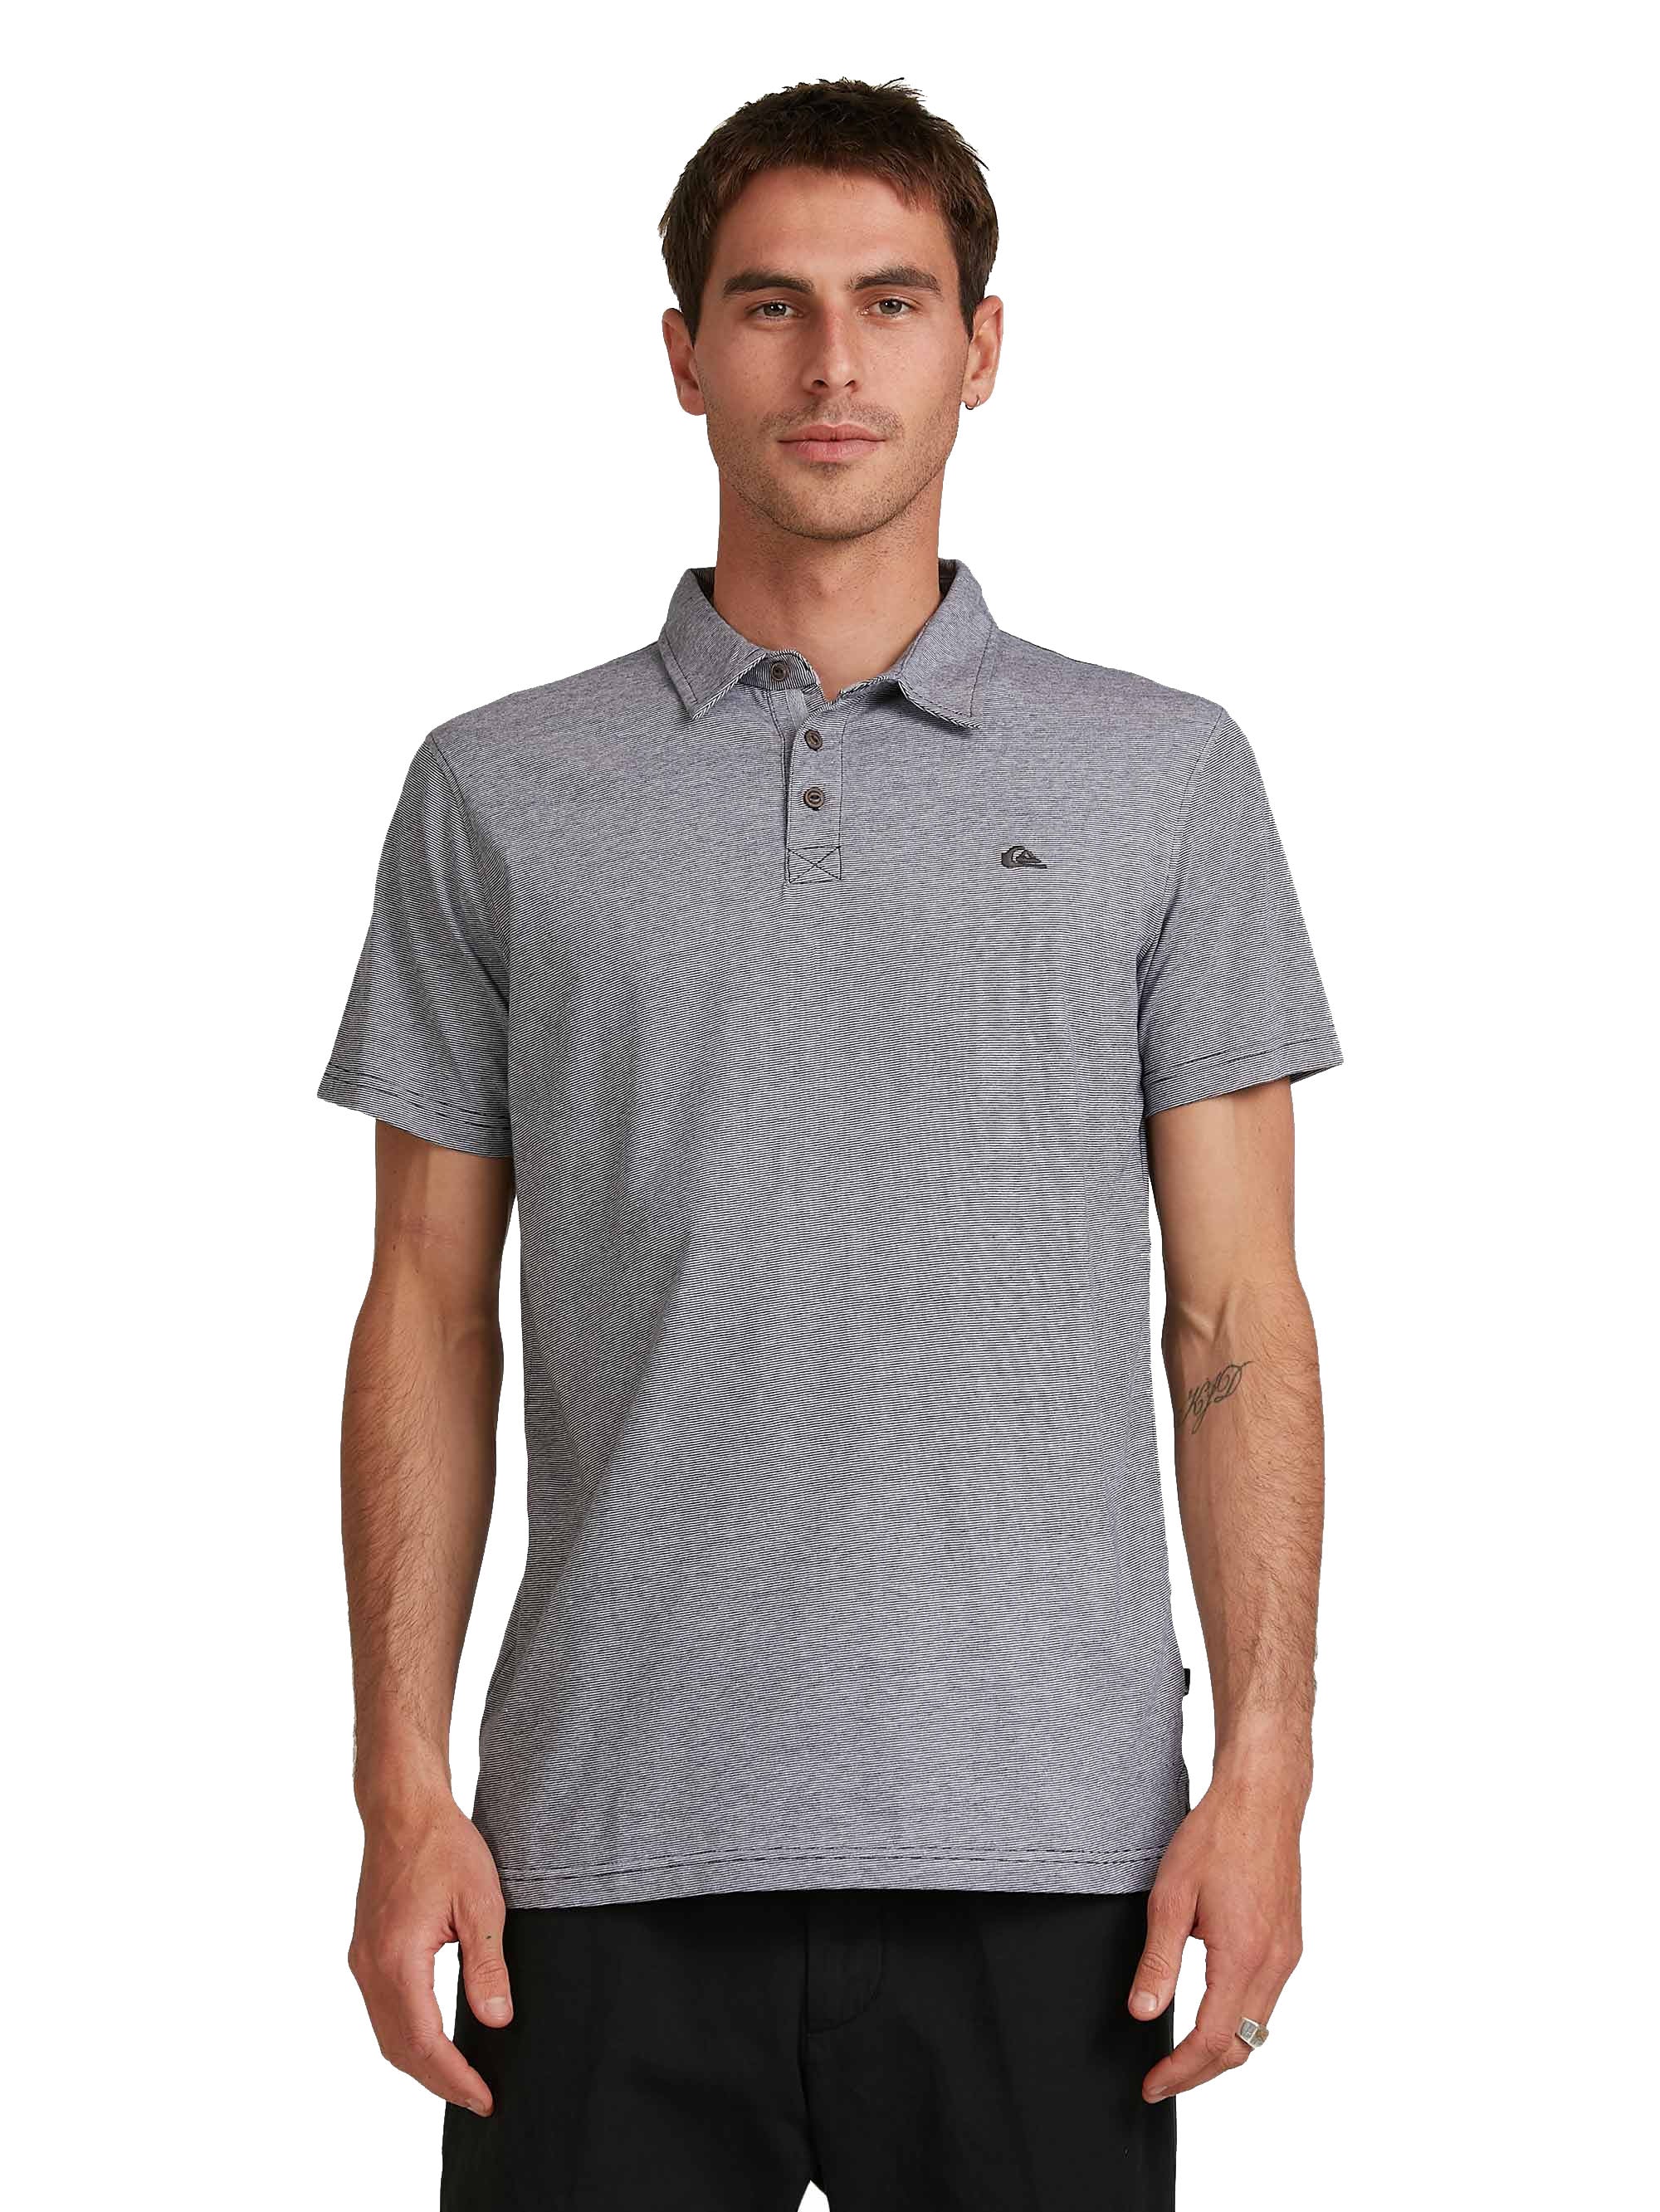 Quiksilver Everyday SunCruise Mens Polo BYP0 S